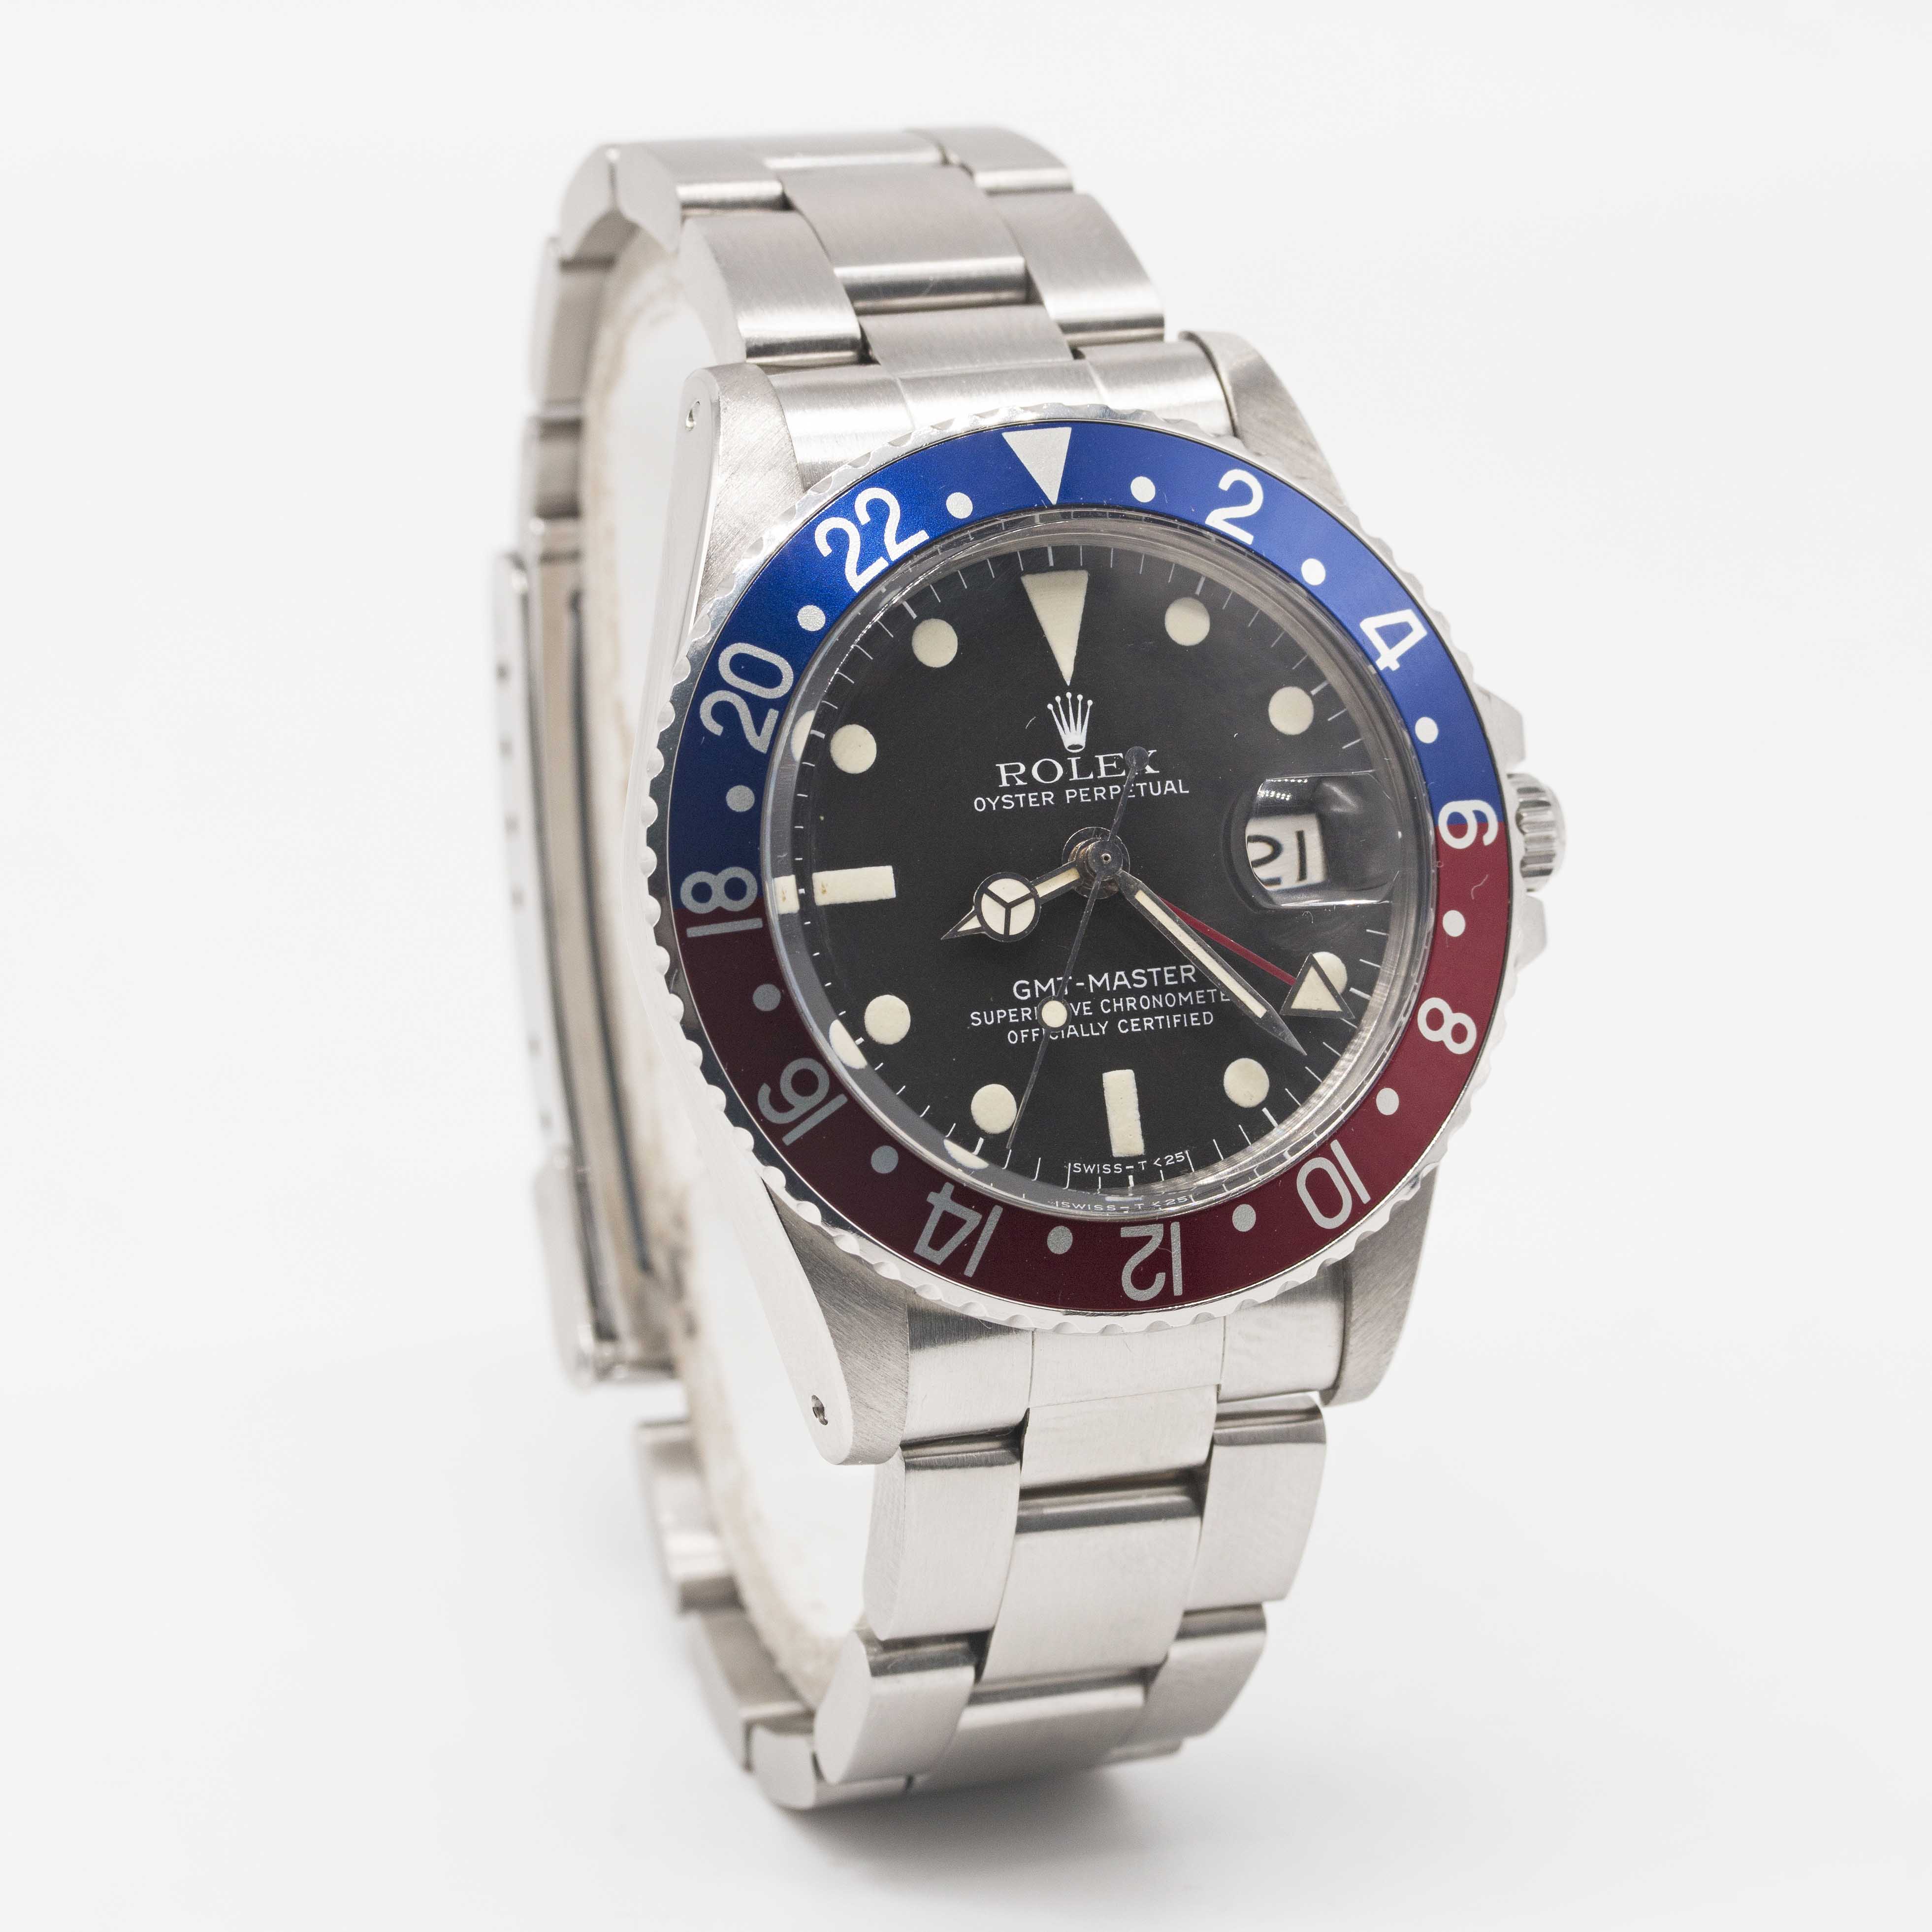 A GENTLEMAN'S STAINLESS STEEL ROLEX OYSTER PERPETUAL GMT MASTER BRACELET WATCH CIRCA 1978, REF. 1675 - Image 4 of 7